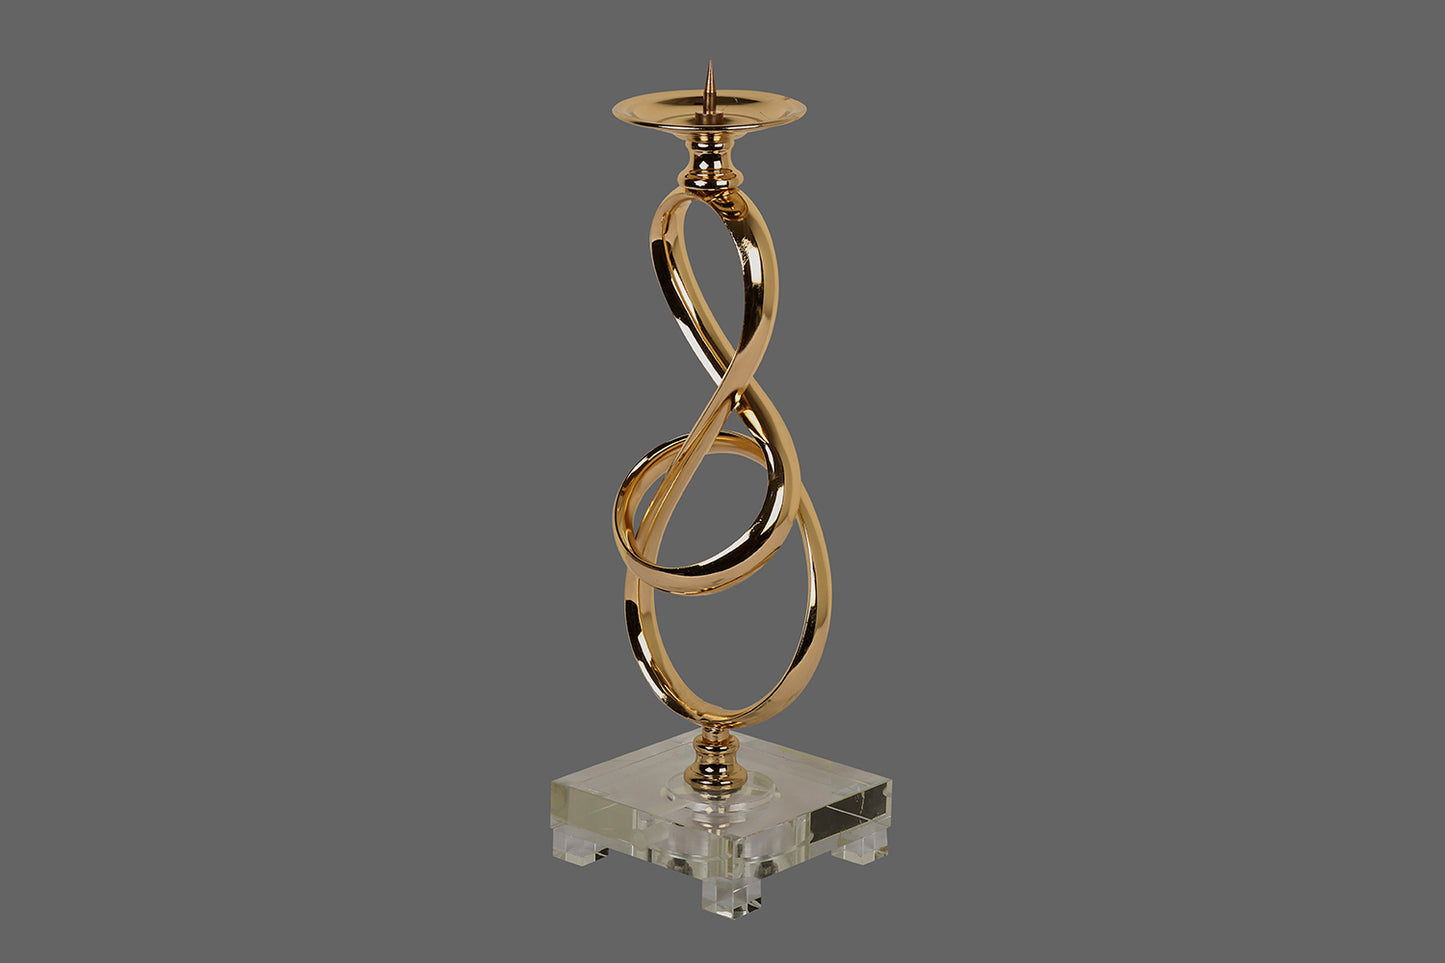 A Metallic Candle stand, with a chrome gold finish and in shape of a knot.